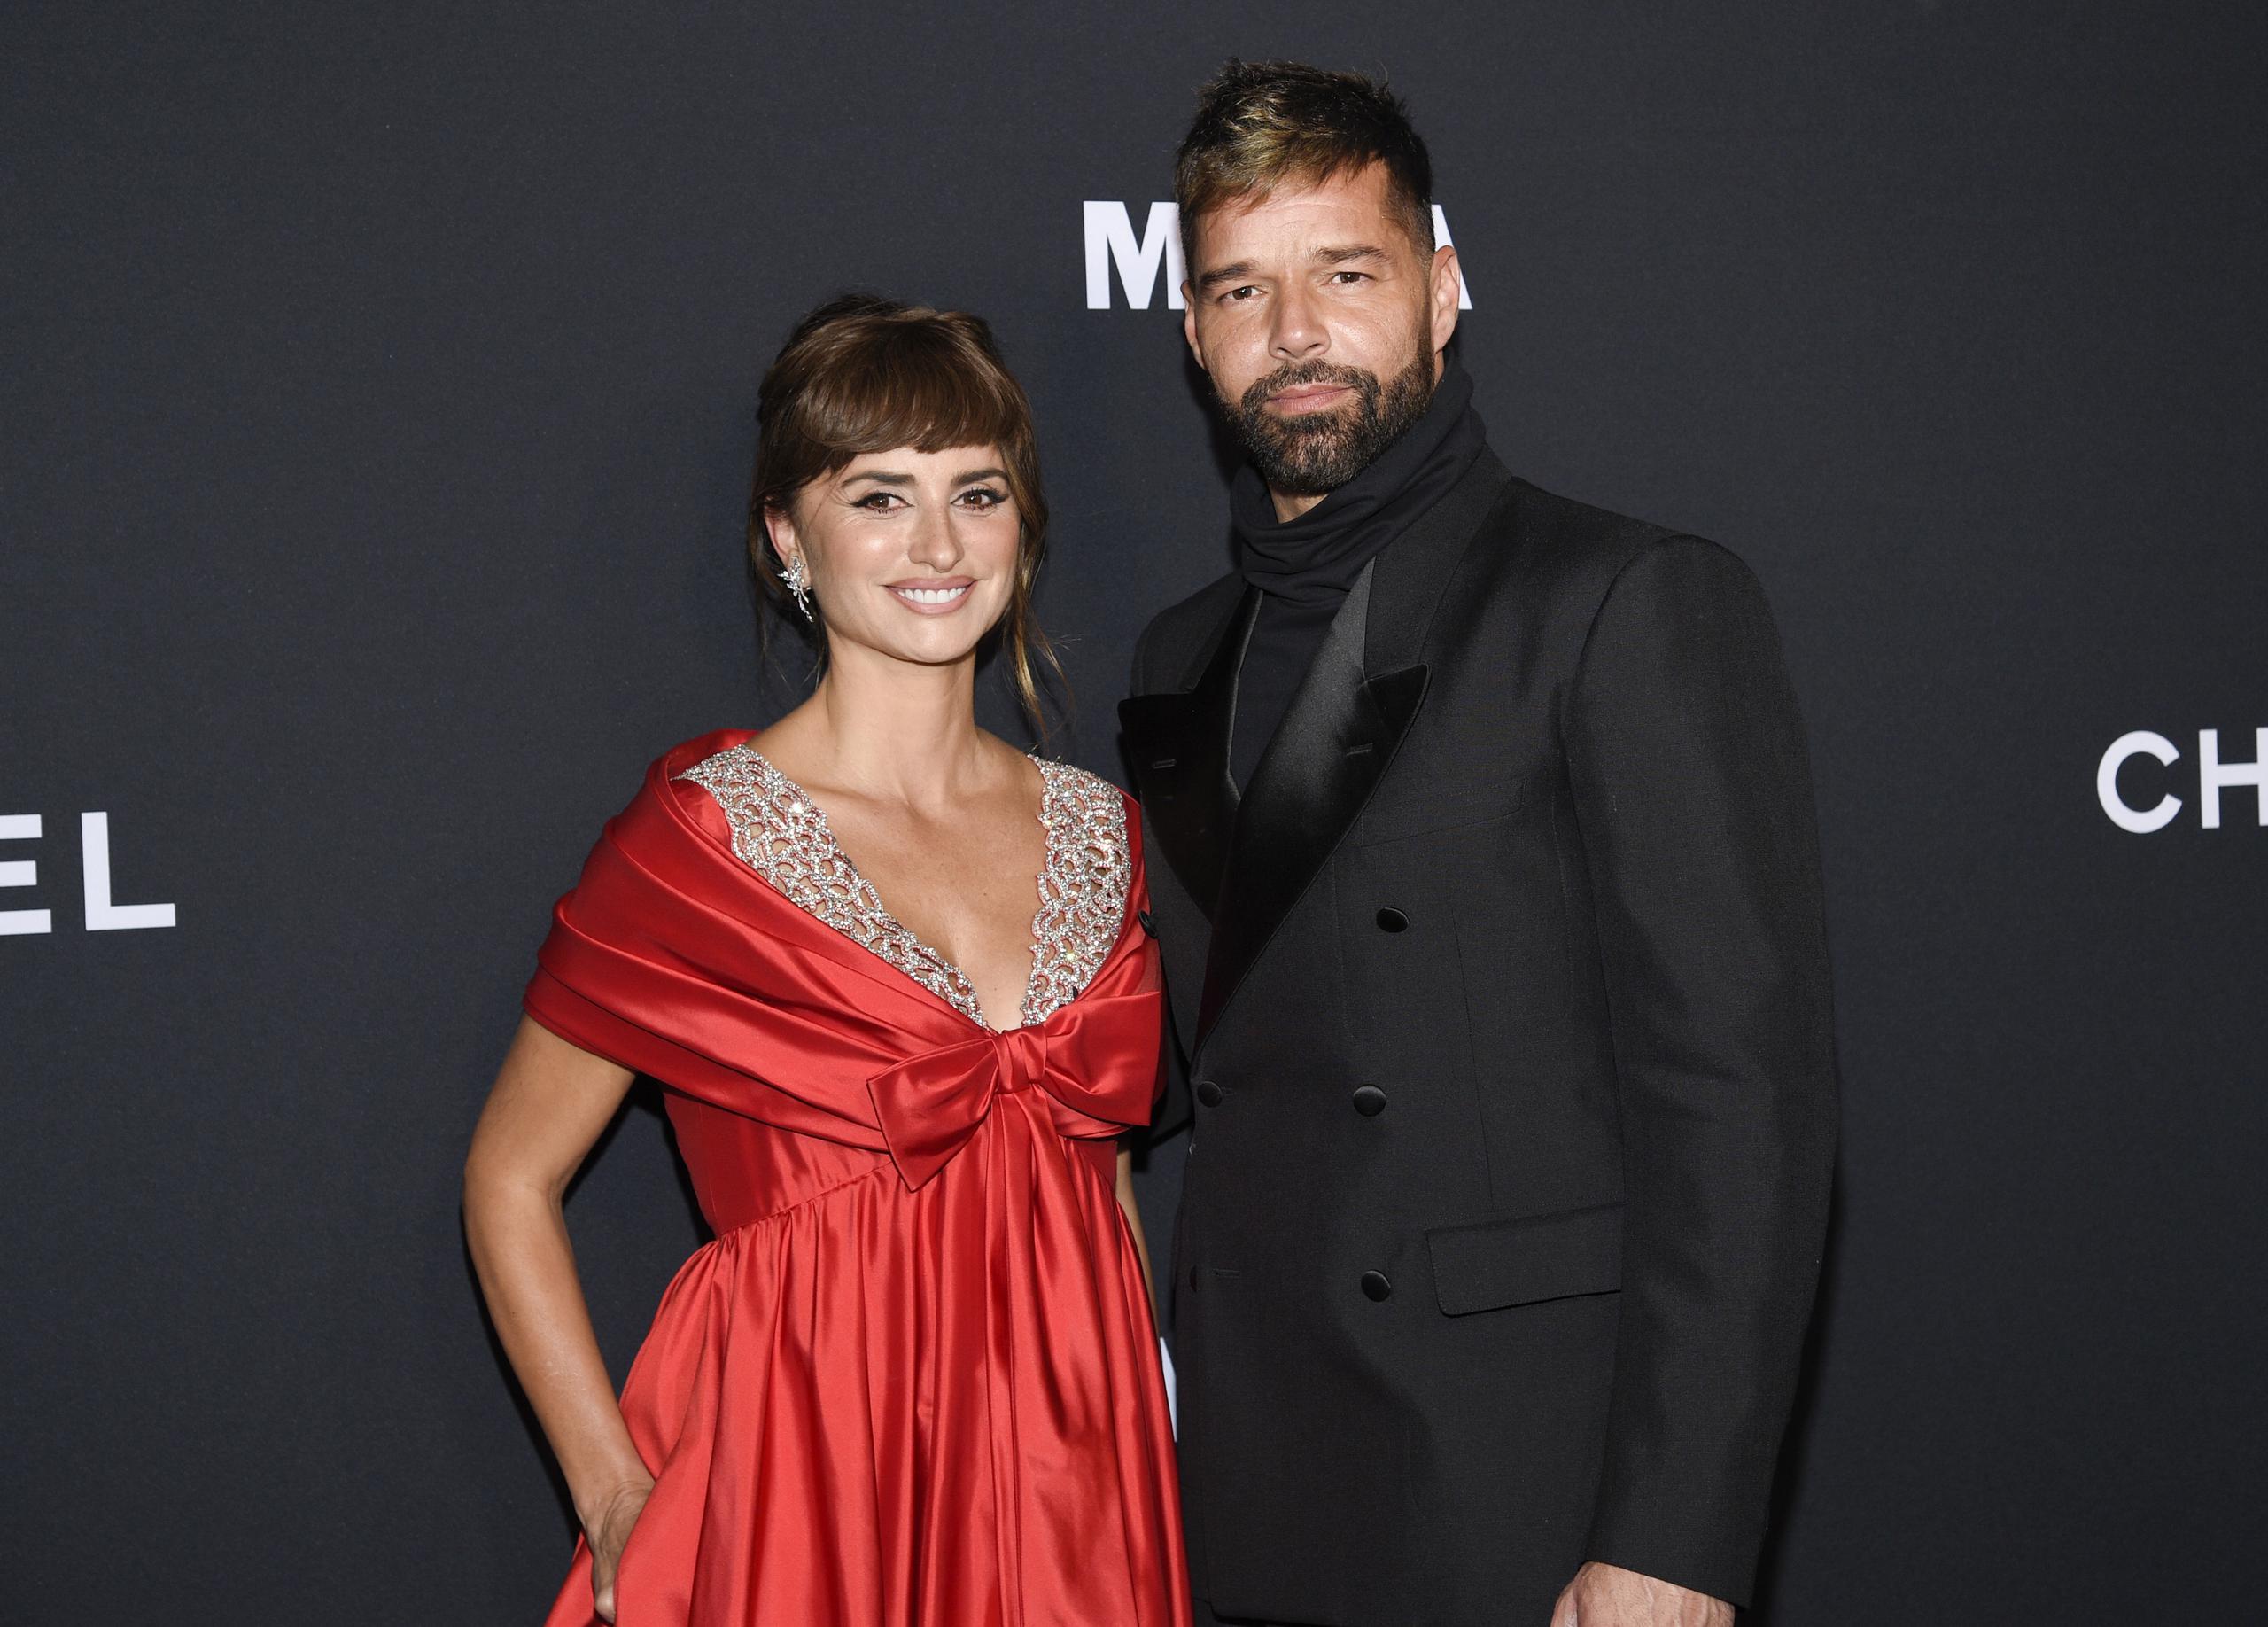 Penelope Cruz, left, and Ricky Martin attend the MoMA Film Benefit presented by CHANEL honoring Penelope Cruz at the Museum of Modern Art on Tuesday, Dec. 14, 2021, in New York. (Photo by Evan Agostini/Invision/AP)